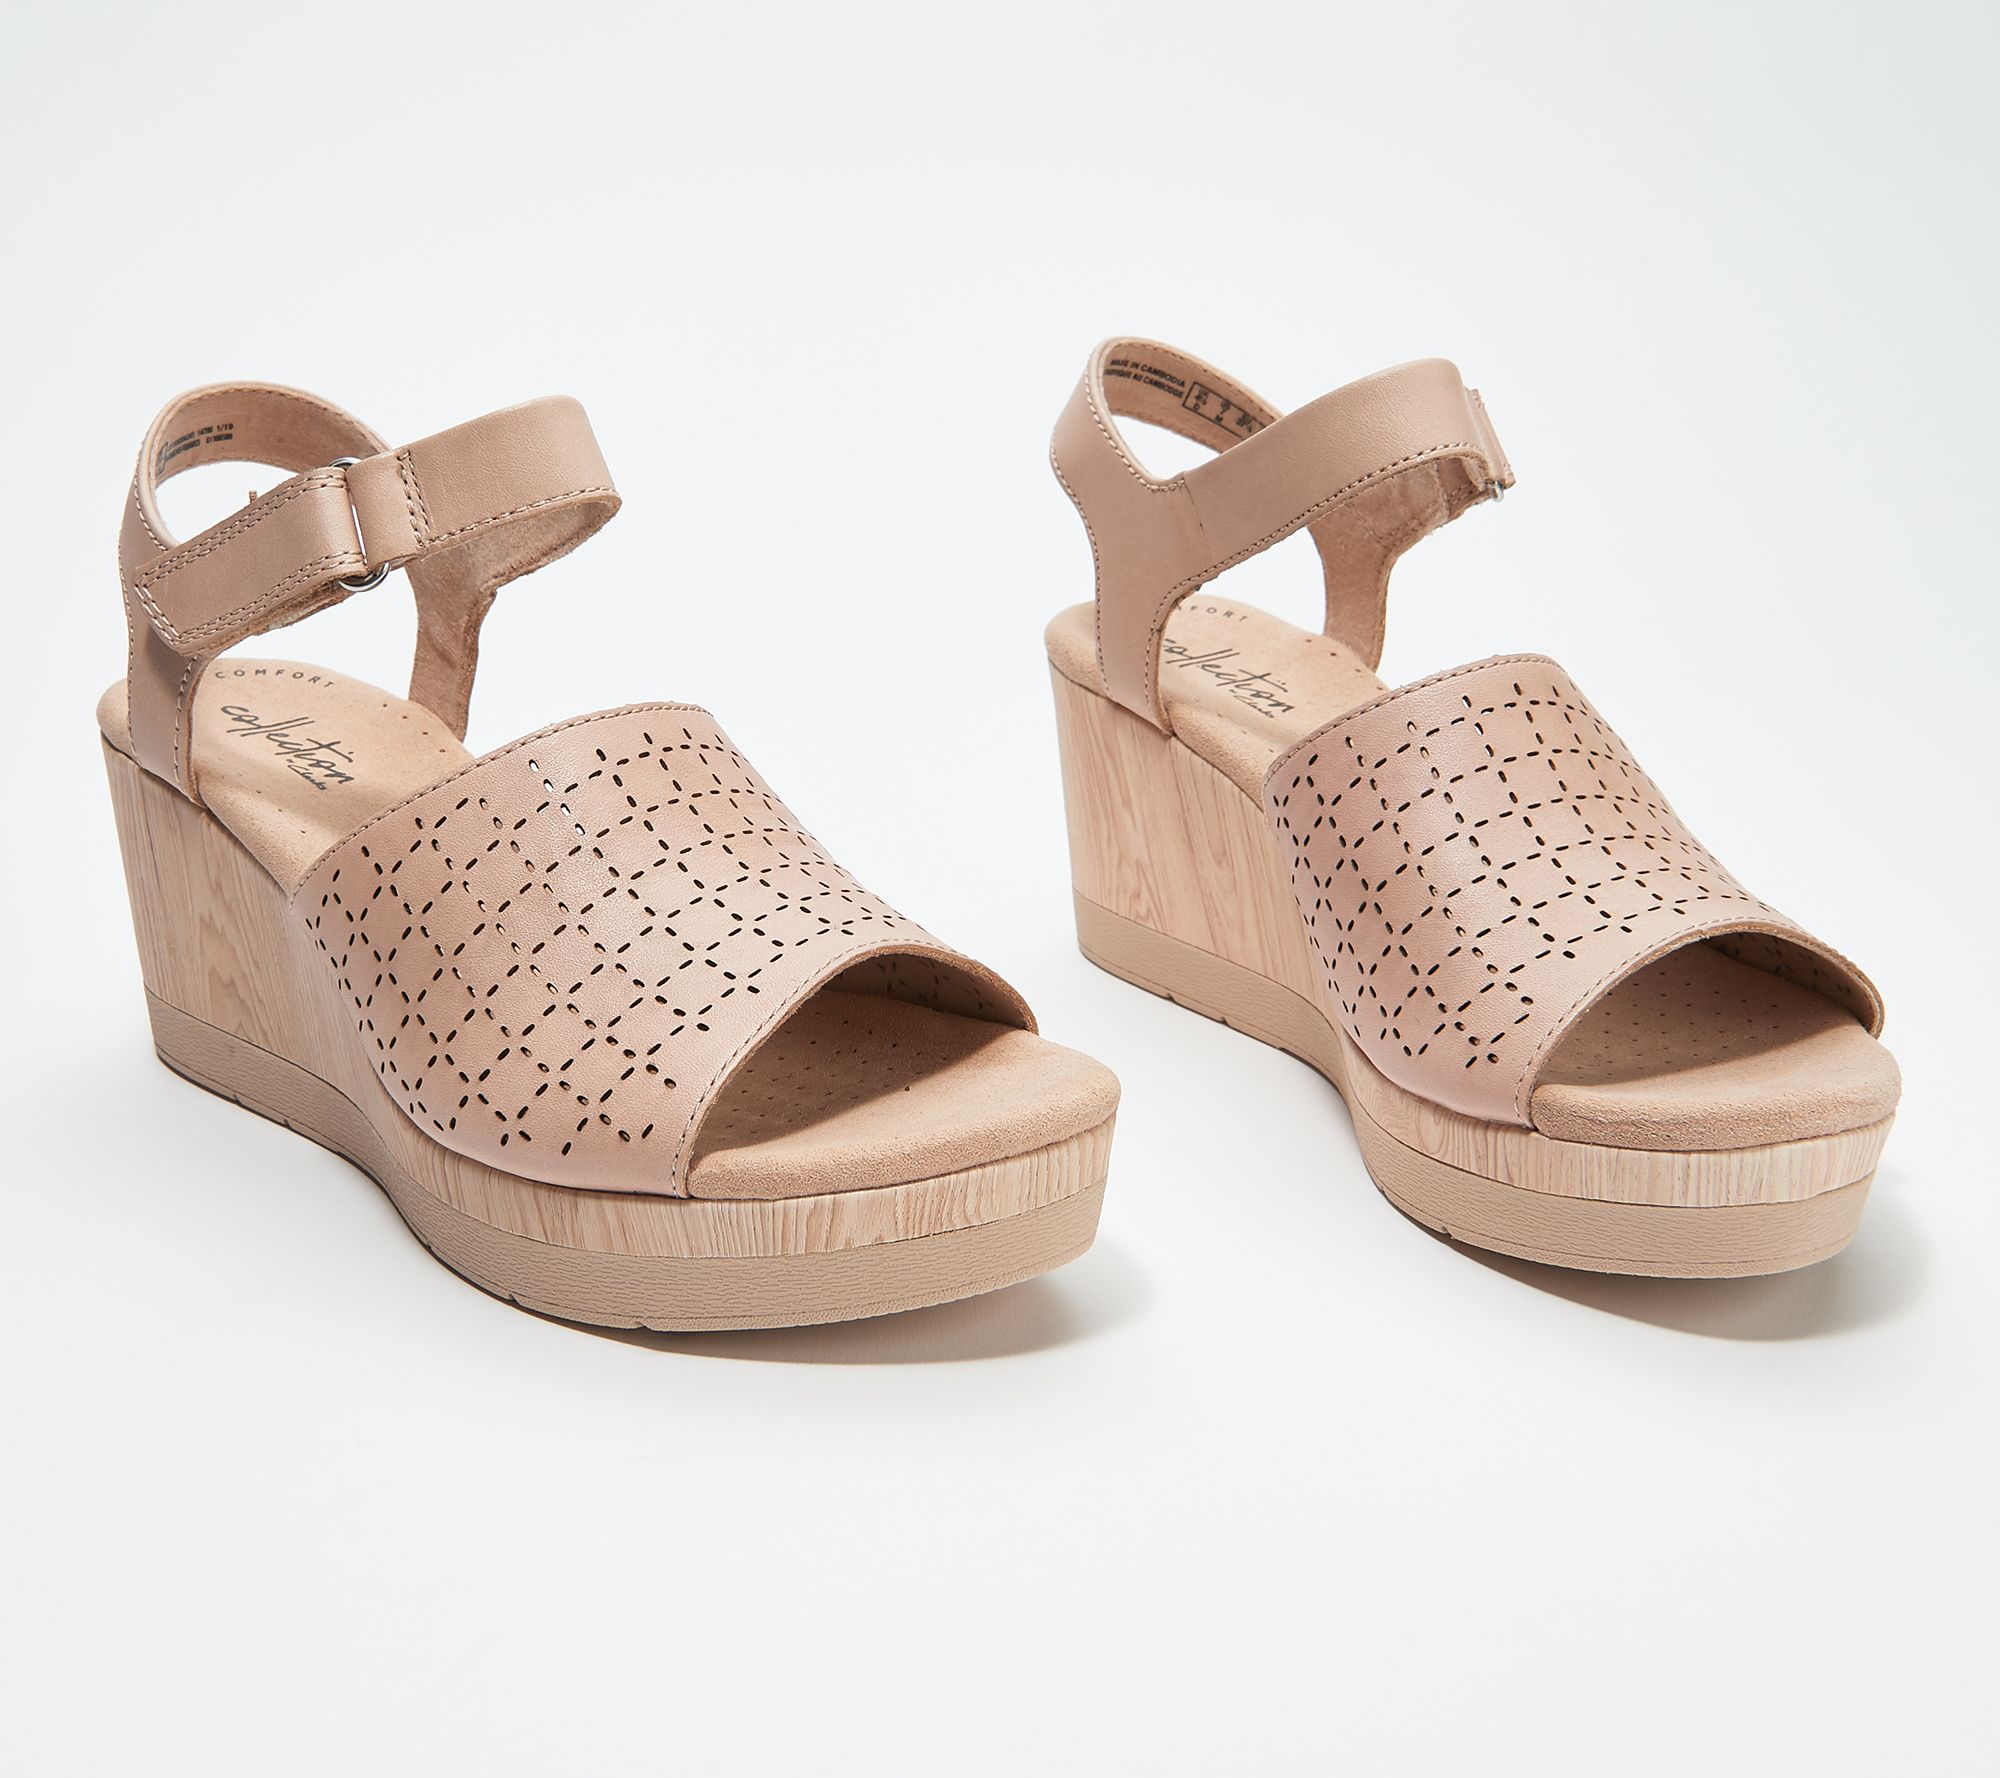 clarks cammy pearl wedge